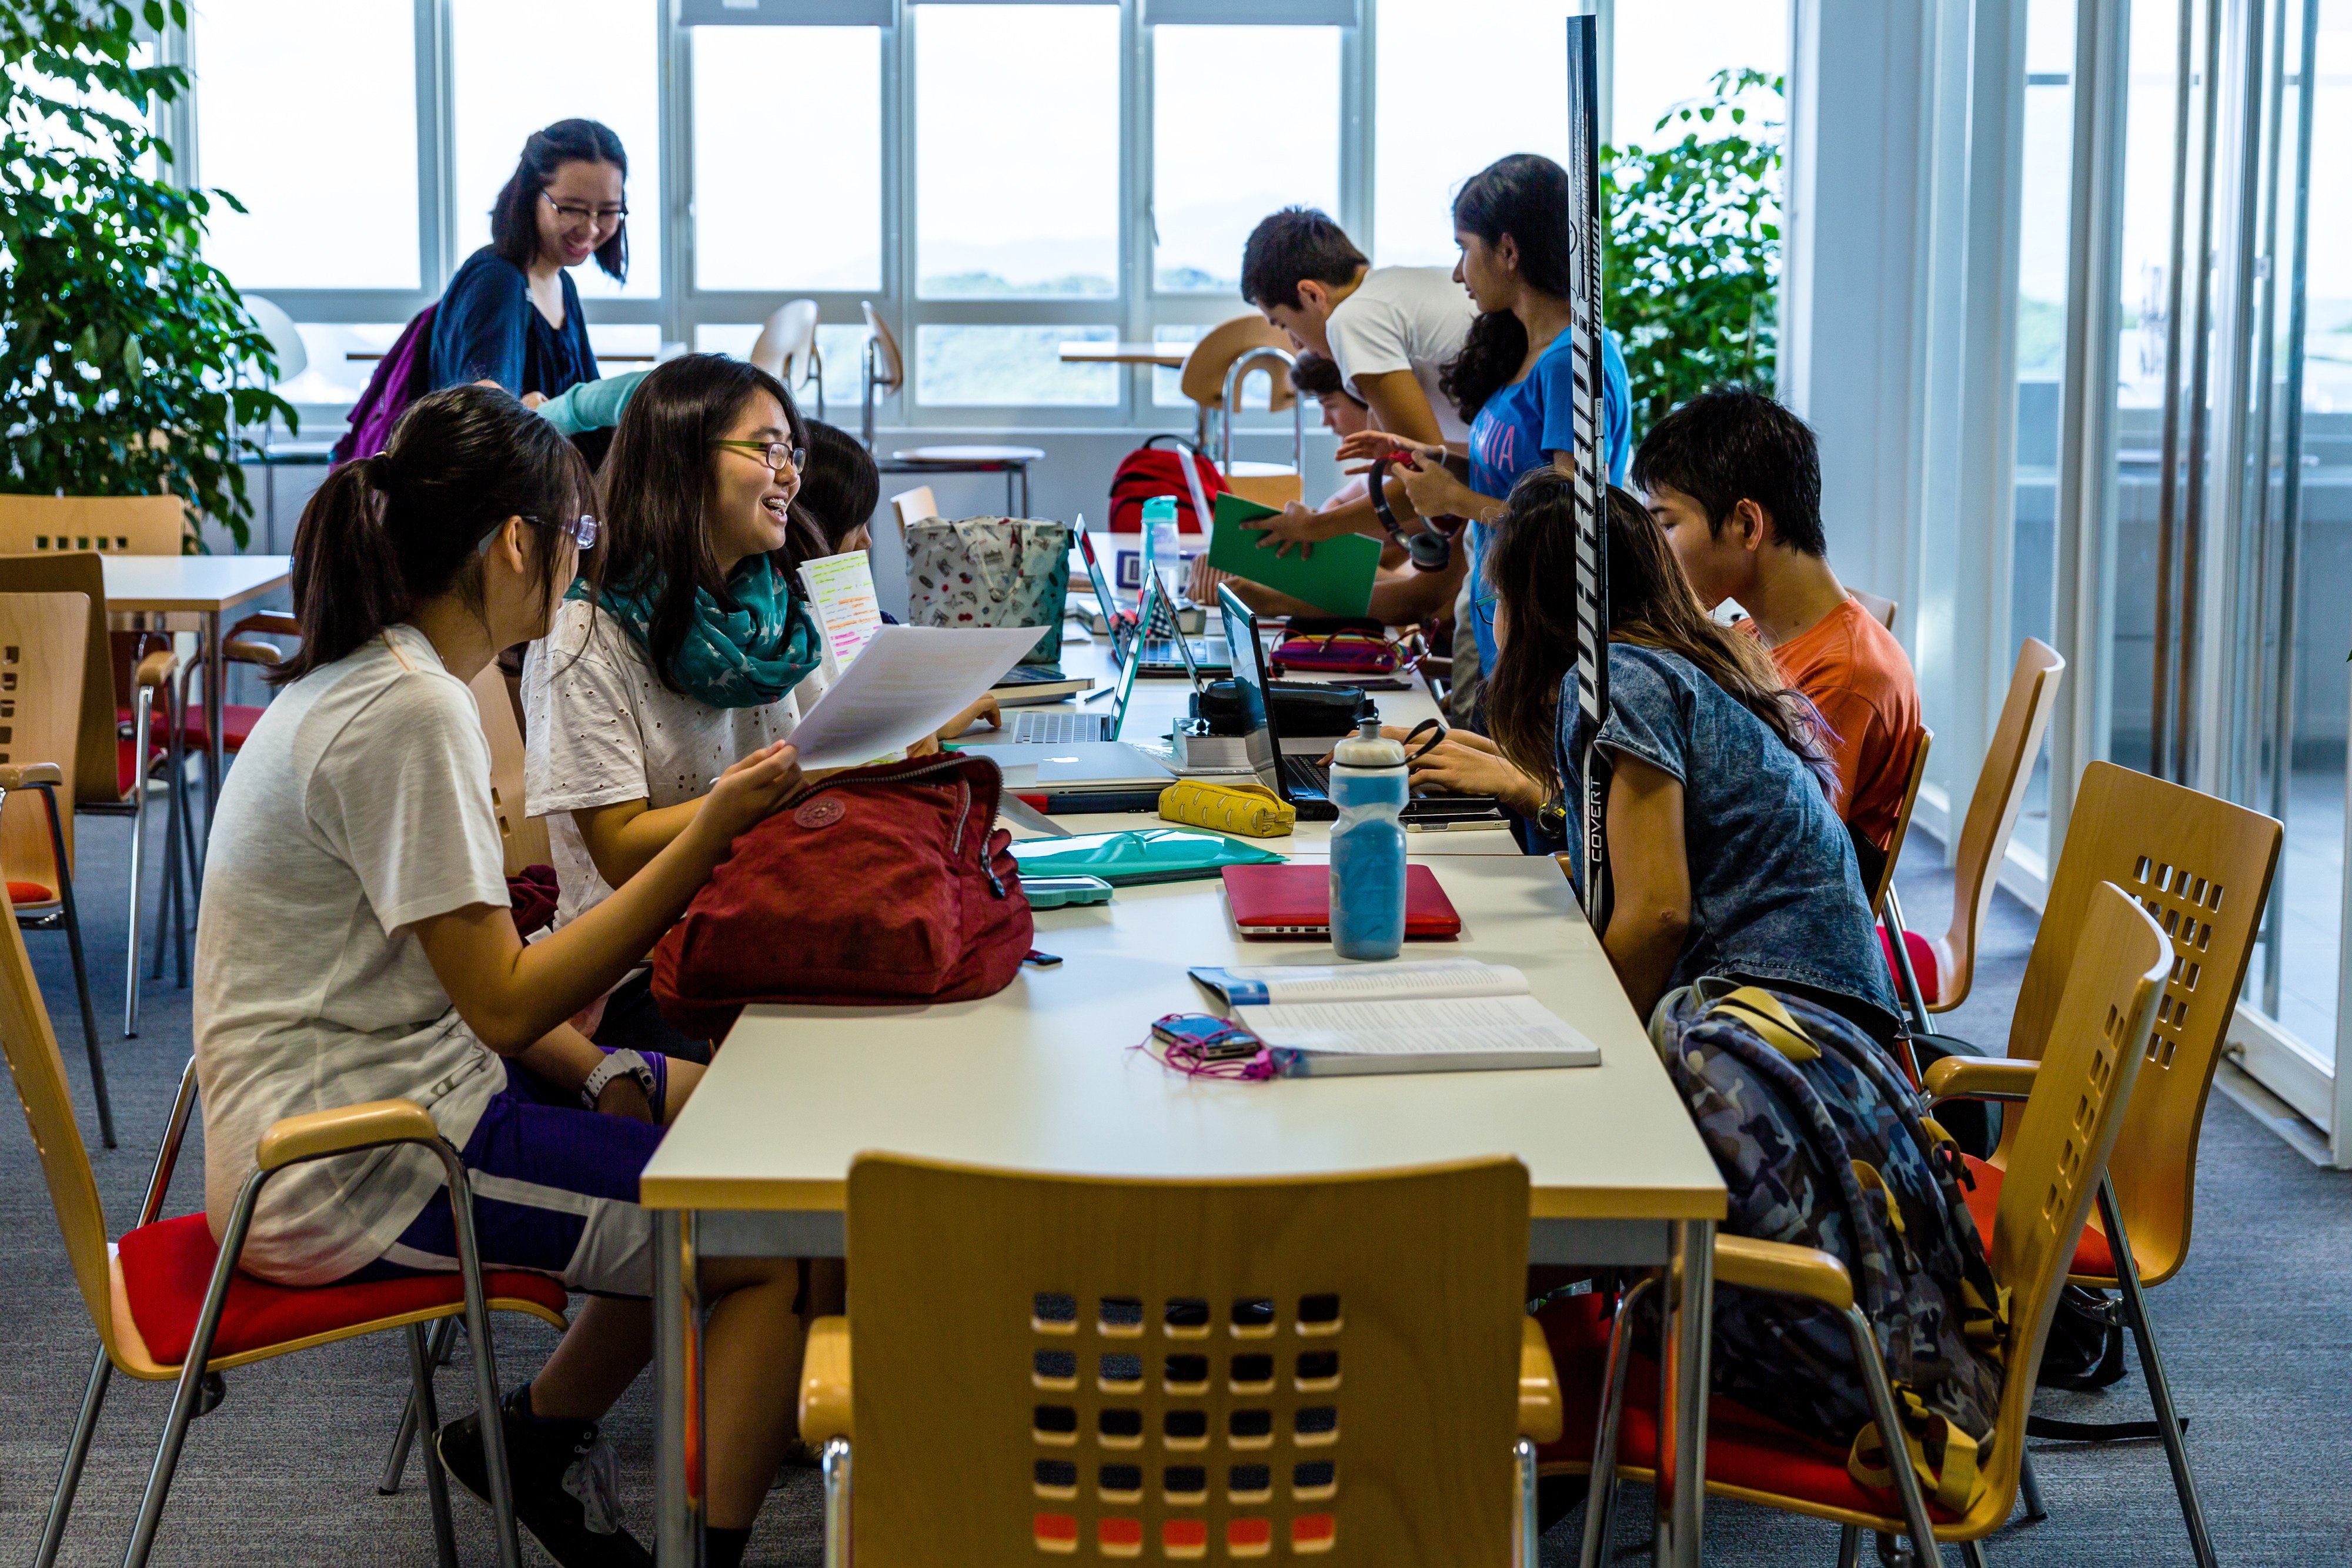 Increasingly, universities look beyond academic assessments to candidates’ community involvement and passions. Photo: German Swiss International School (GSIS)